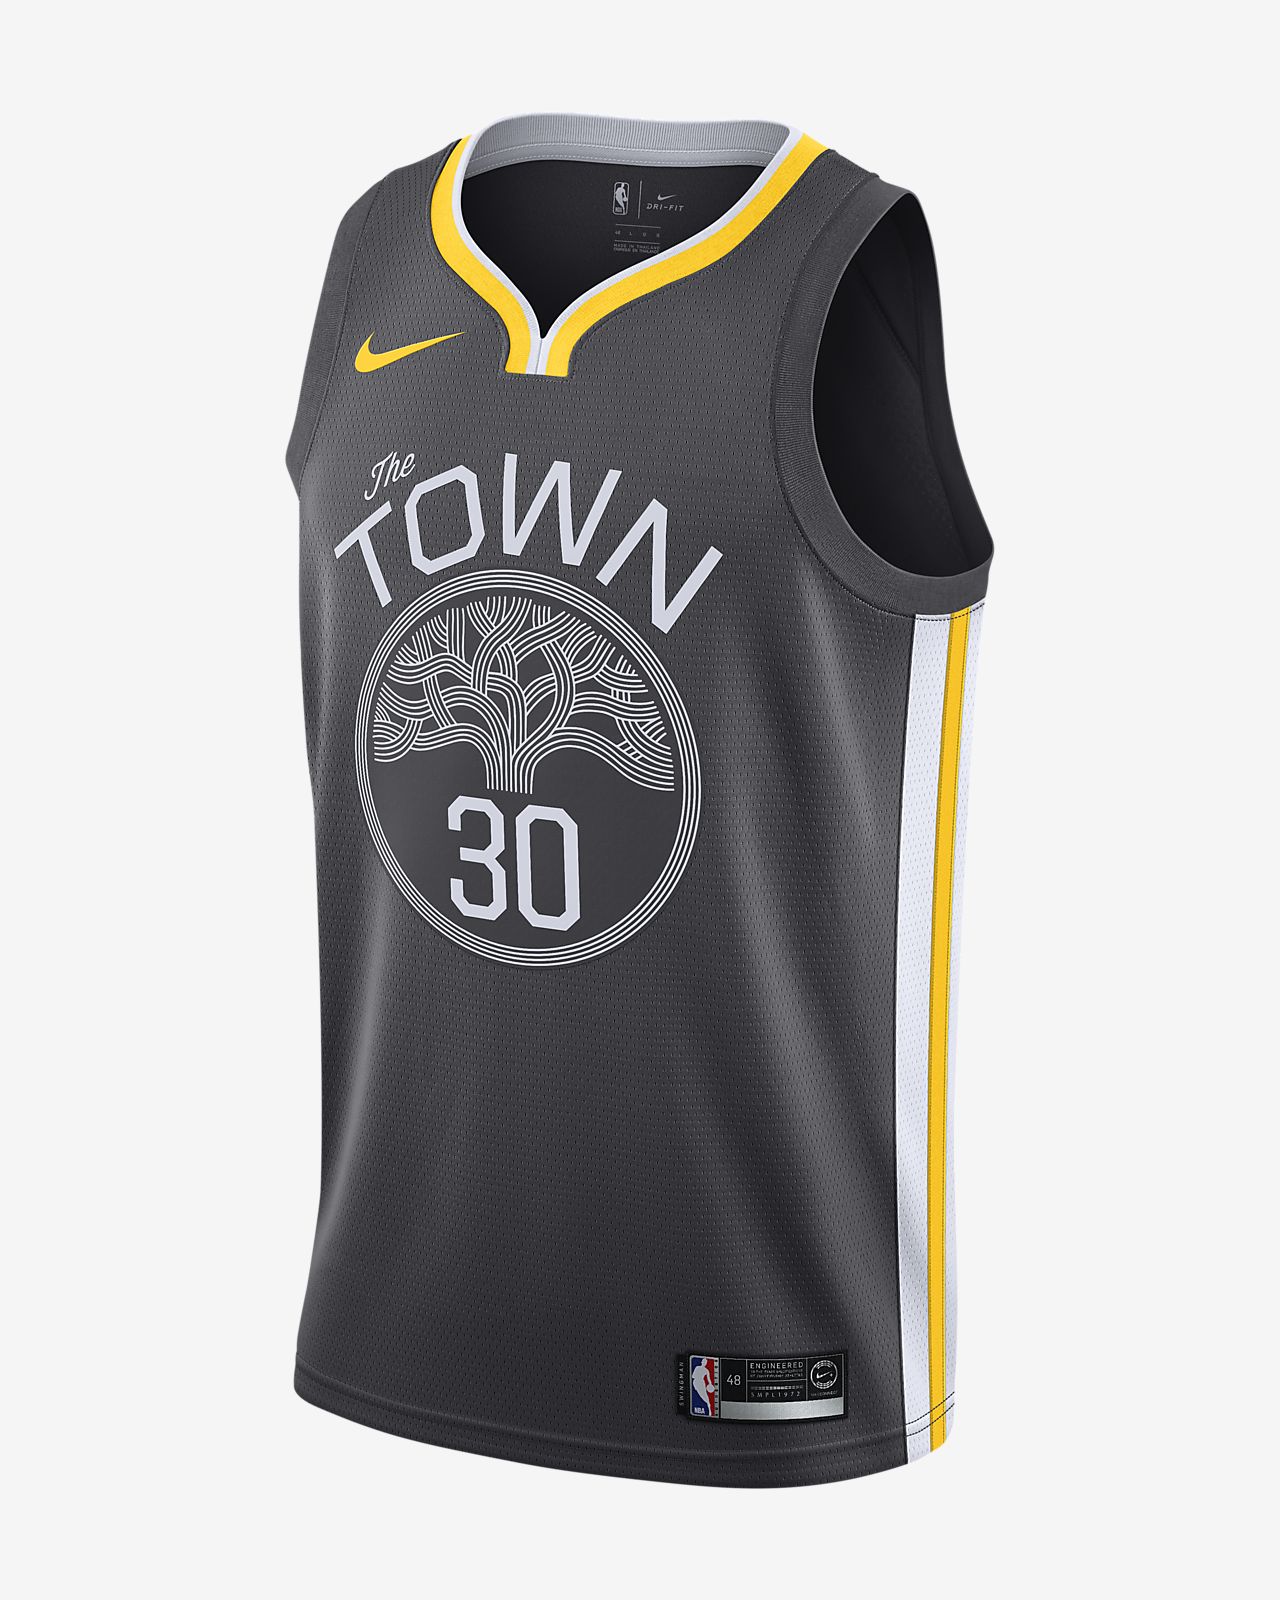 cool stephen curry jersey